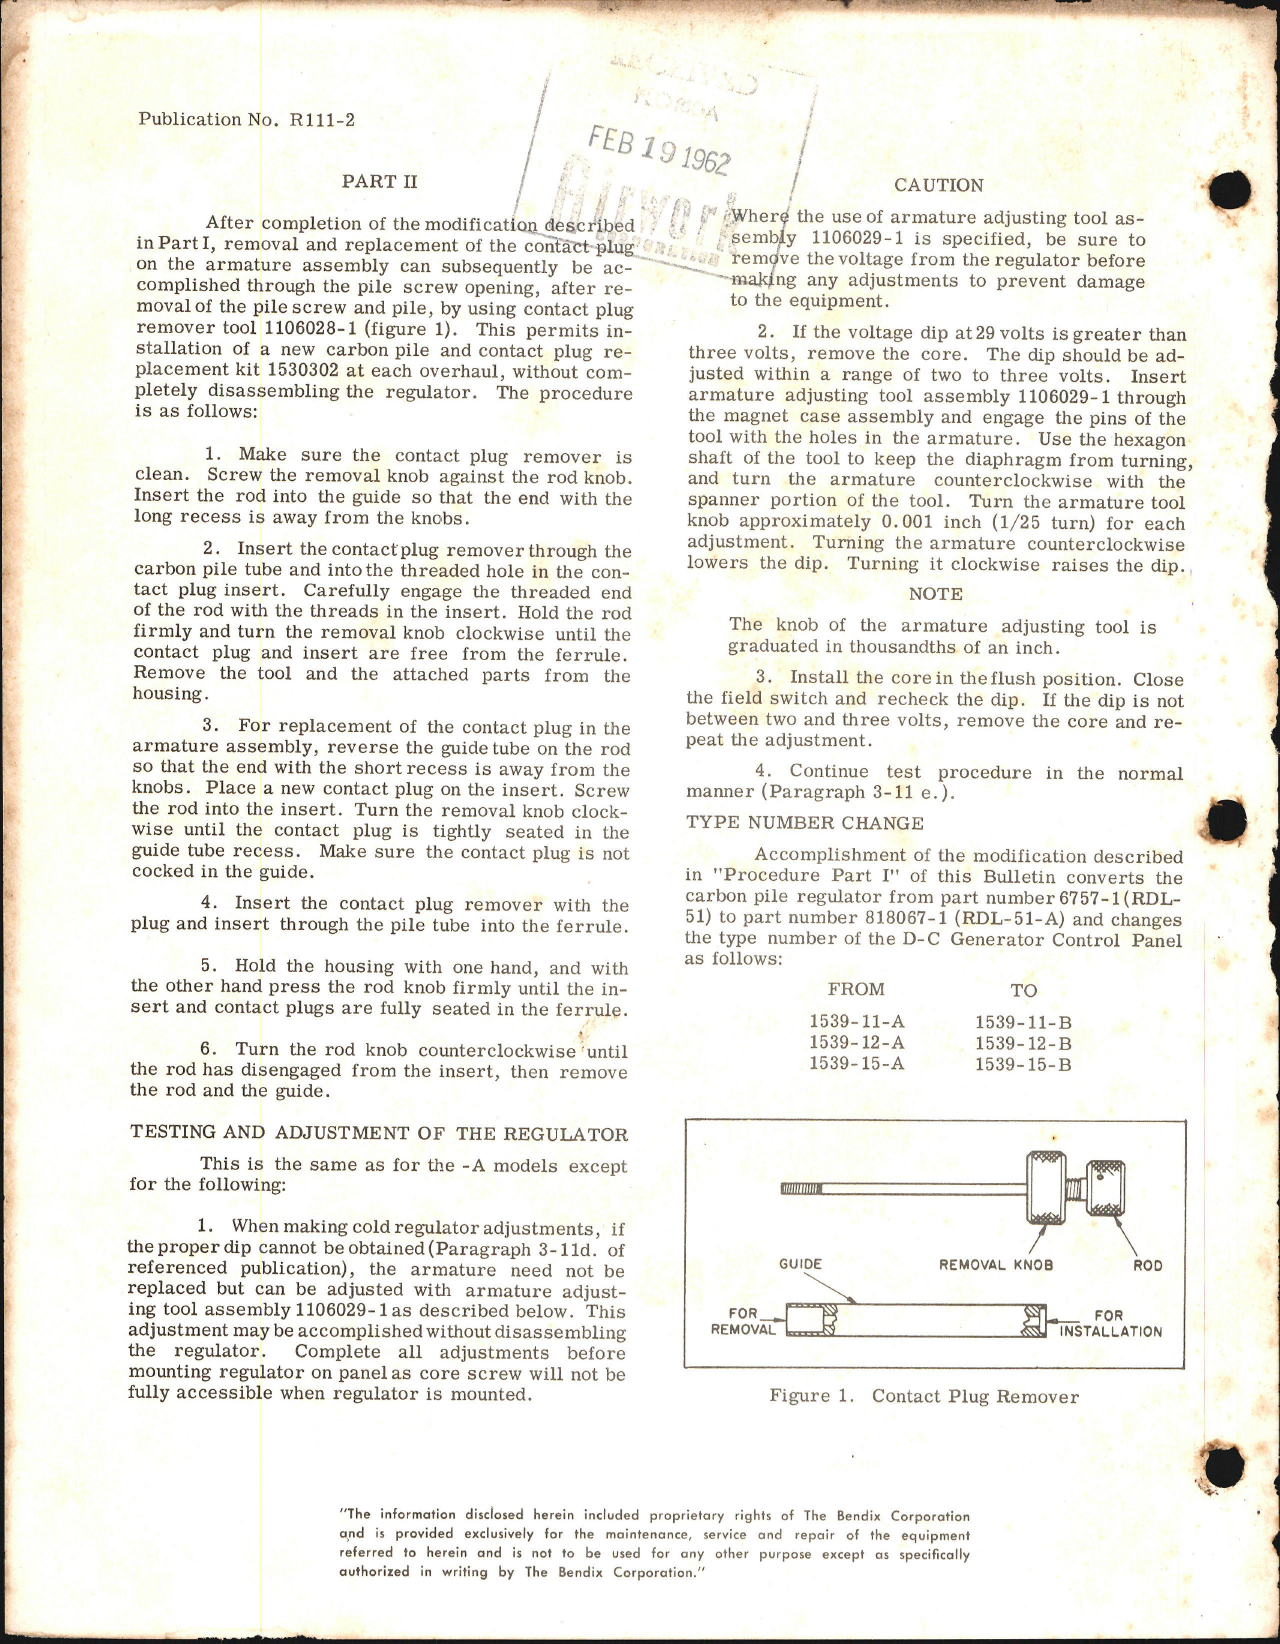 Sample page 2 from AirCorps Library document: Installation of Adjustable Armature Assembly In Carbon Pile Regulator RDL-51 of DC Generator Control Panel